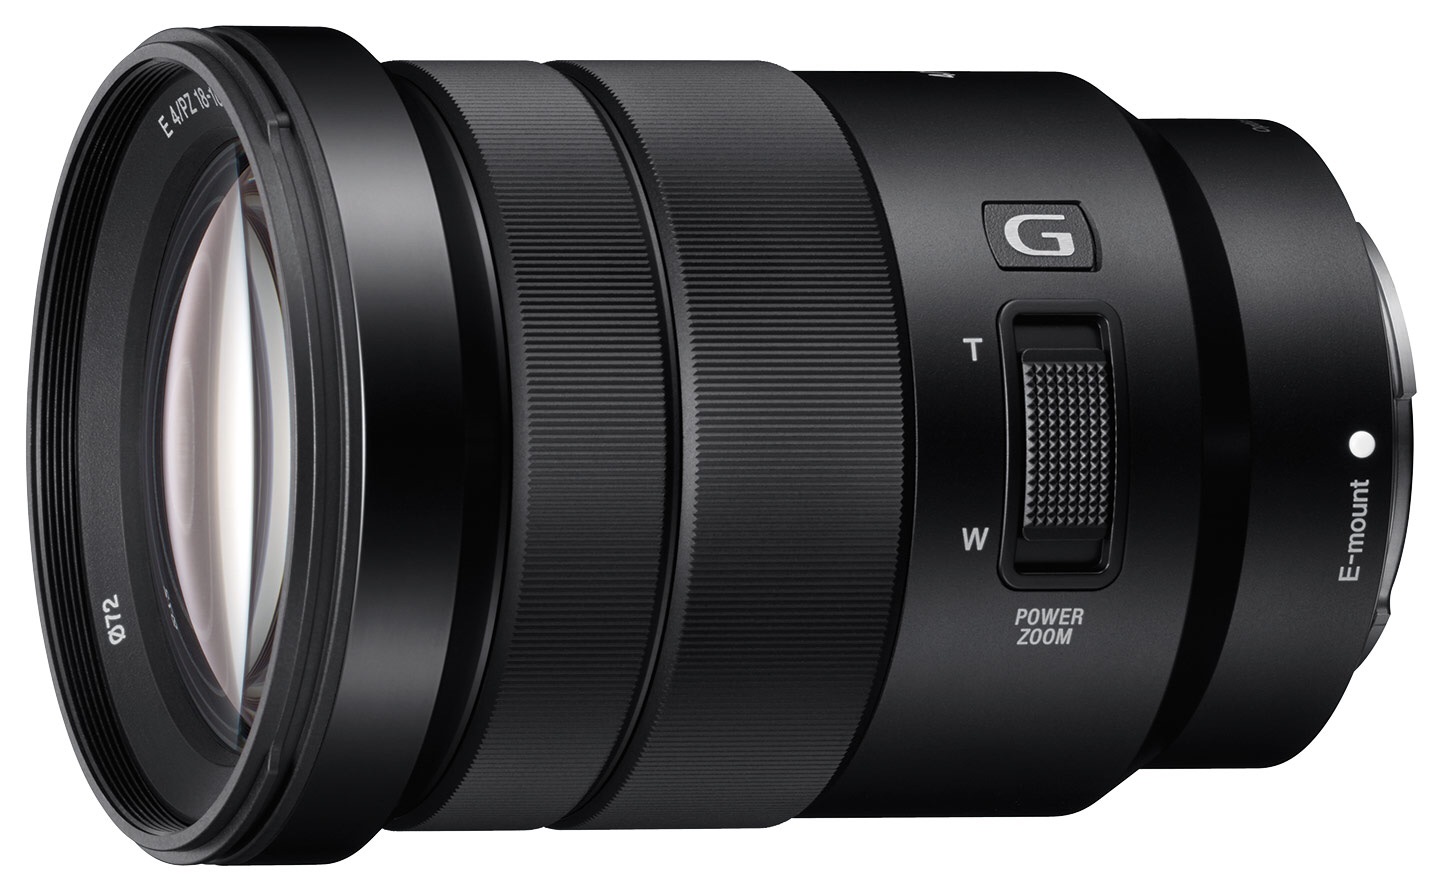 Sony E PZ 18-105mm f/4.0 G OSS Power Zoom Lens for Select Sony E-Mount Cameras Black SELP18105G - 索尼入门镜头